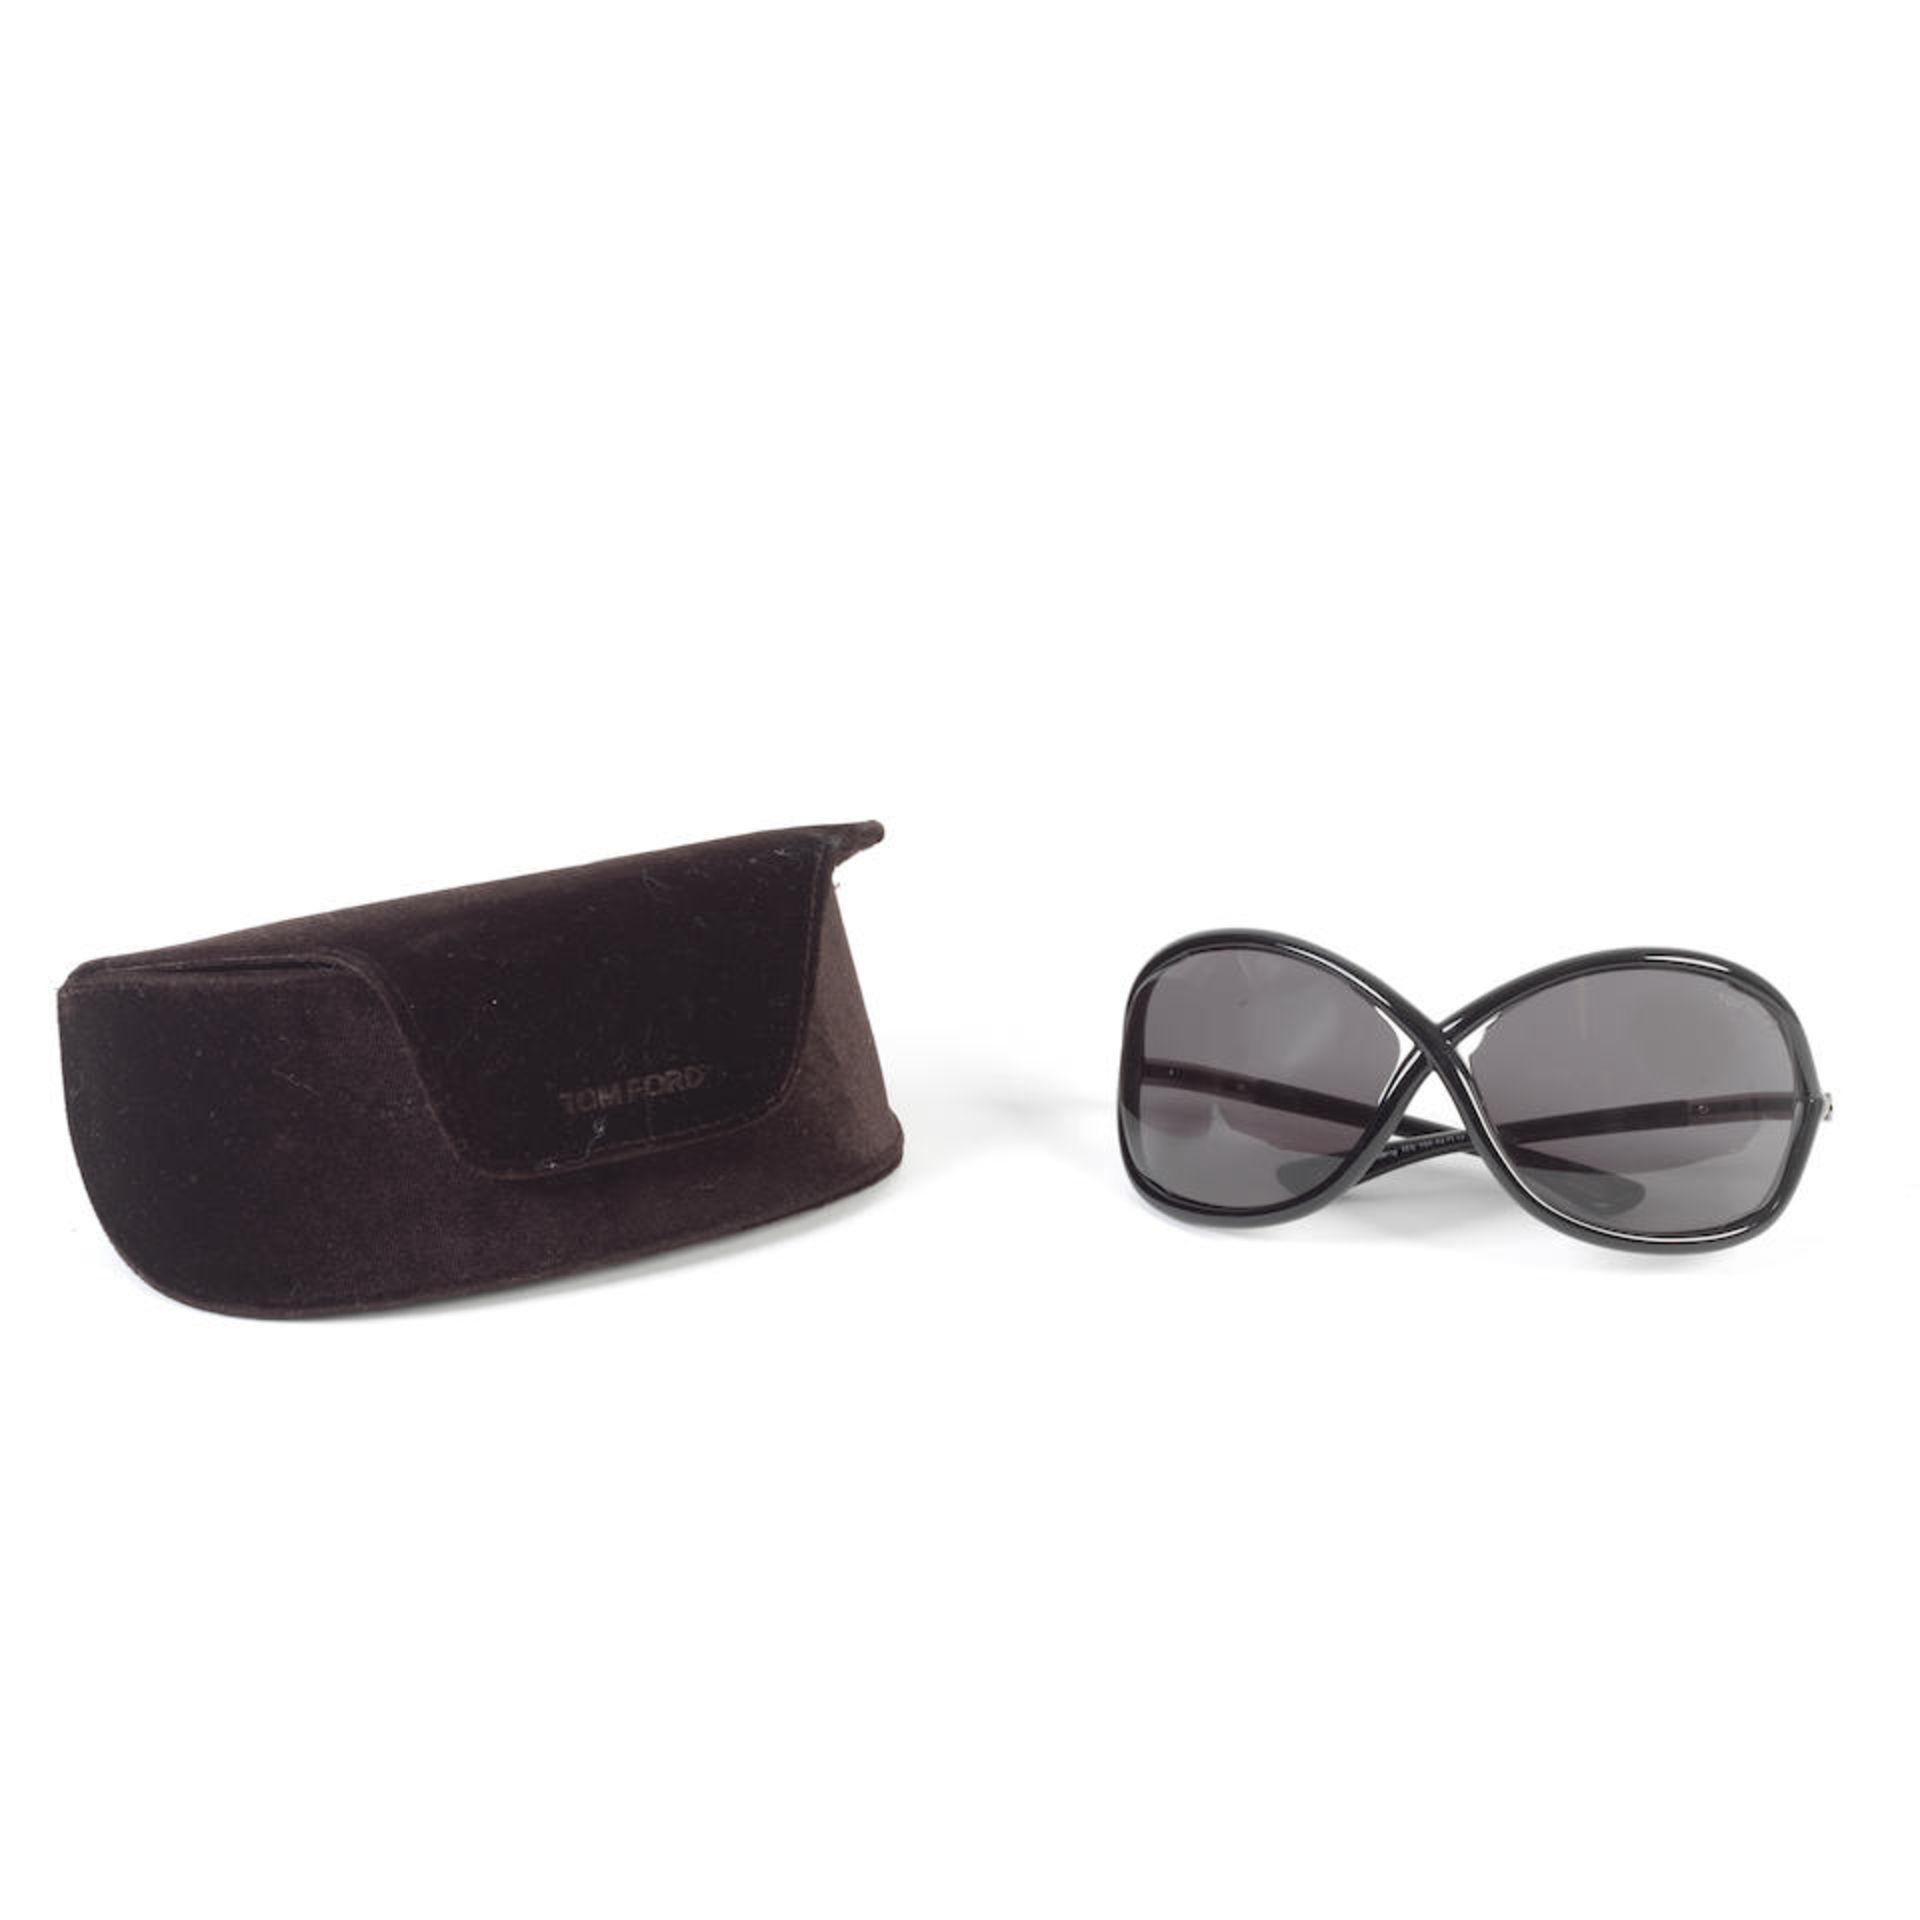 Tom Ford: a Pair of Black Whitney Sunglasses (Includes case)